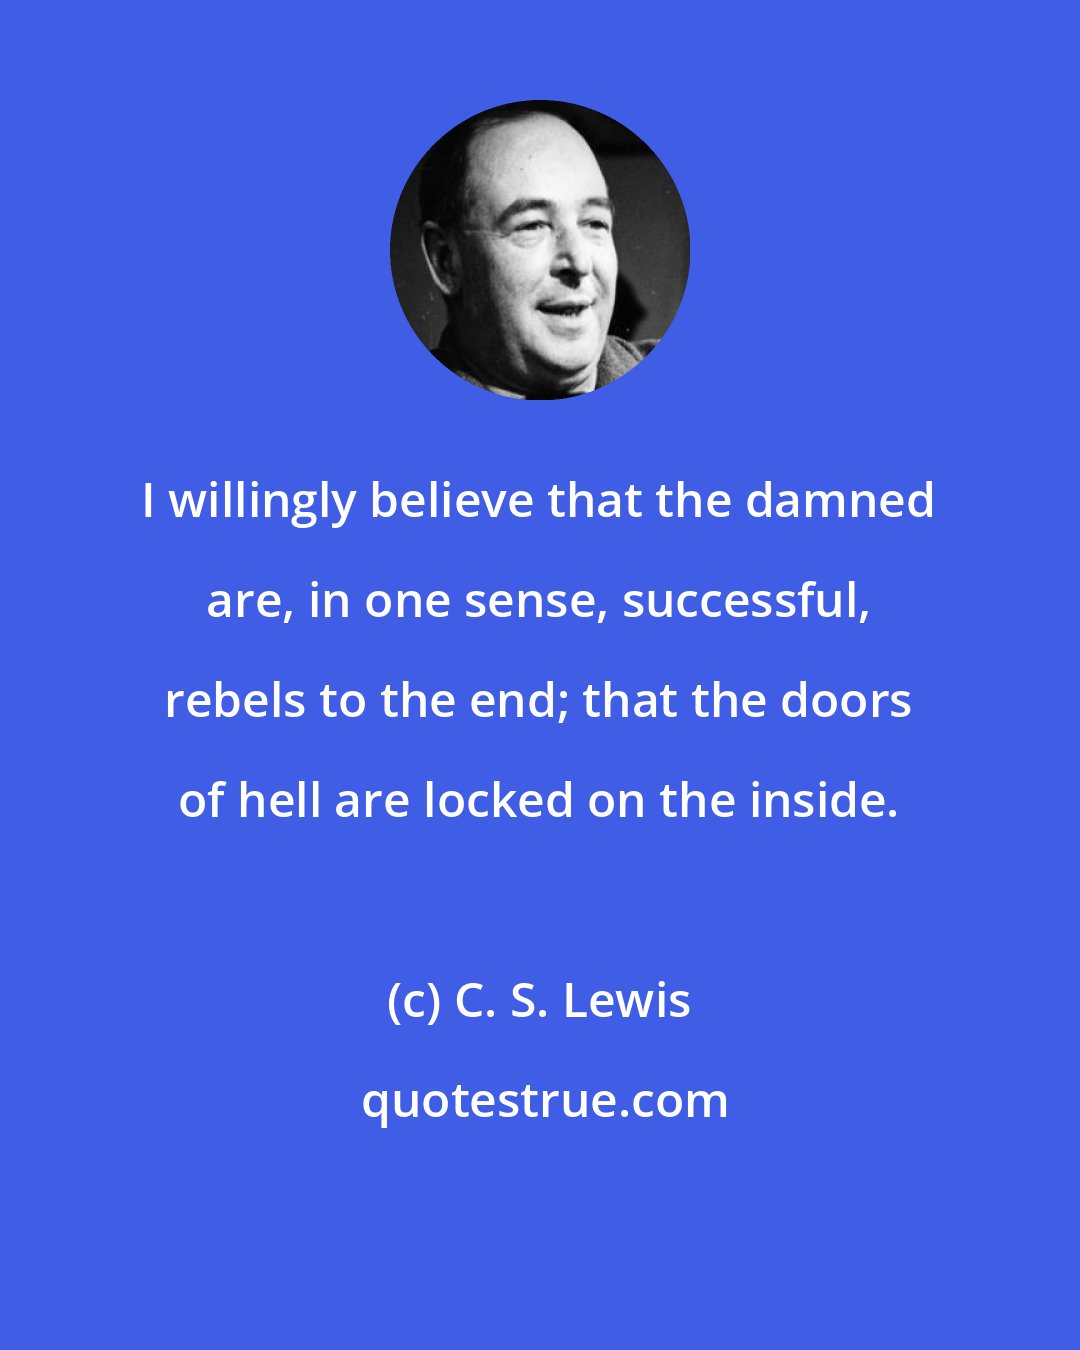 C. S. Lewis: I willingly believe that the damned are, in one sense, successful, rebels to the end; that the doors of hell are locked on the inside.